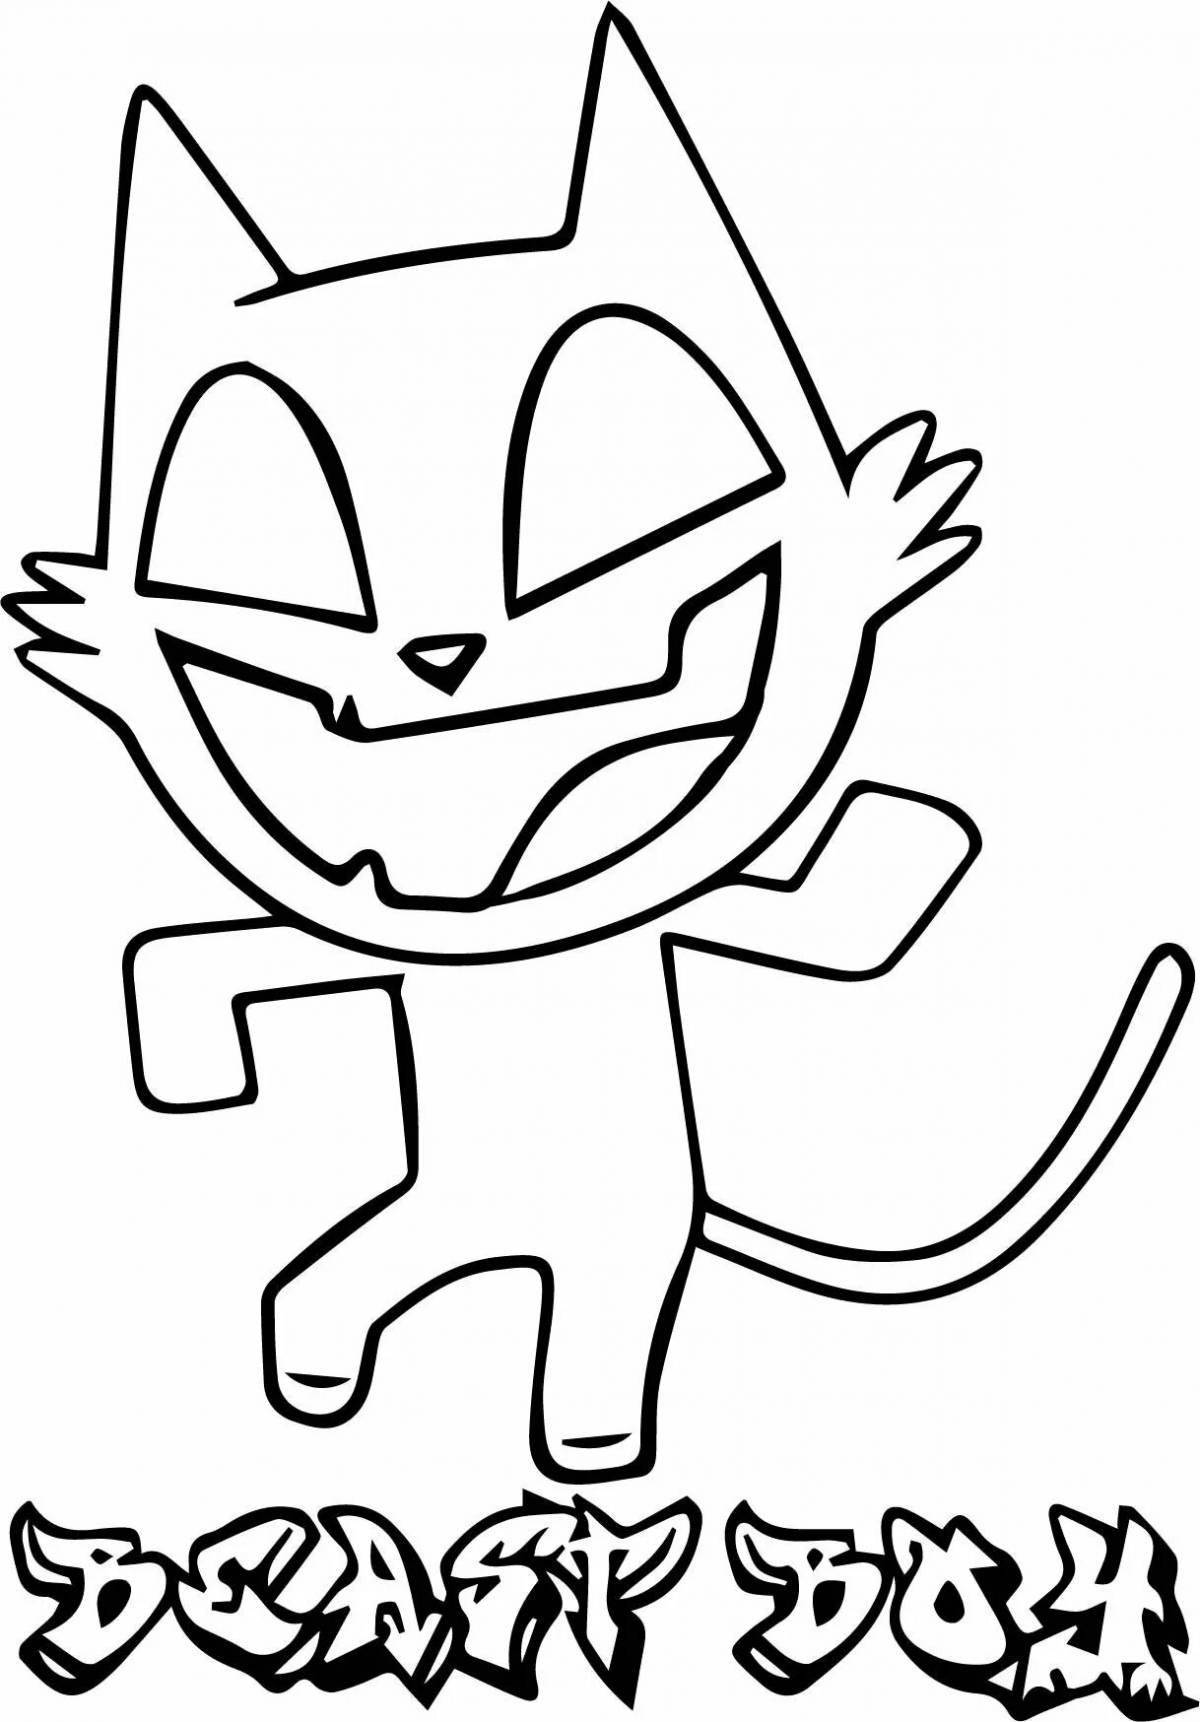 Naughty cartoon cat coloring book for kids